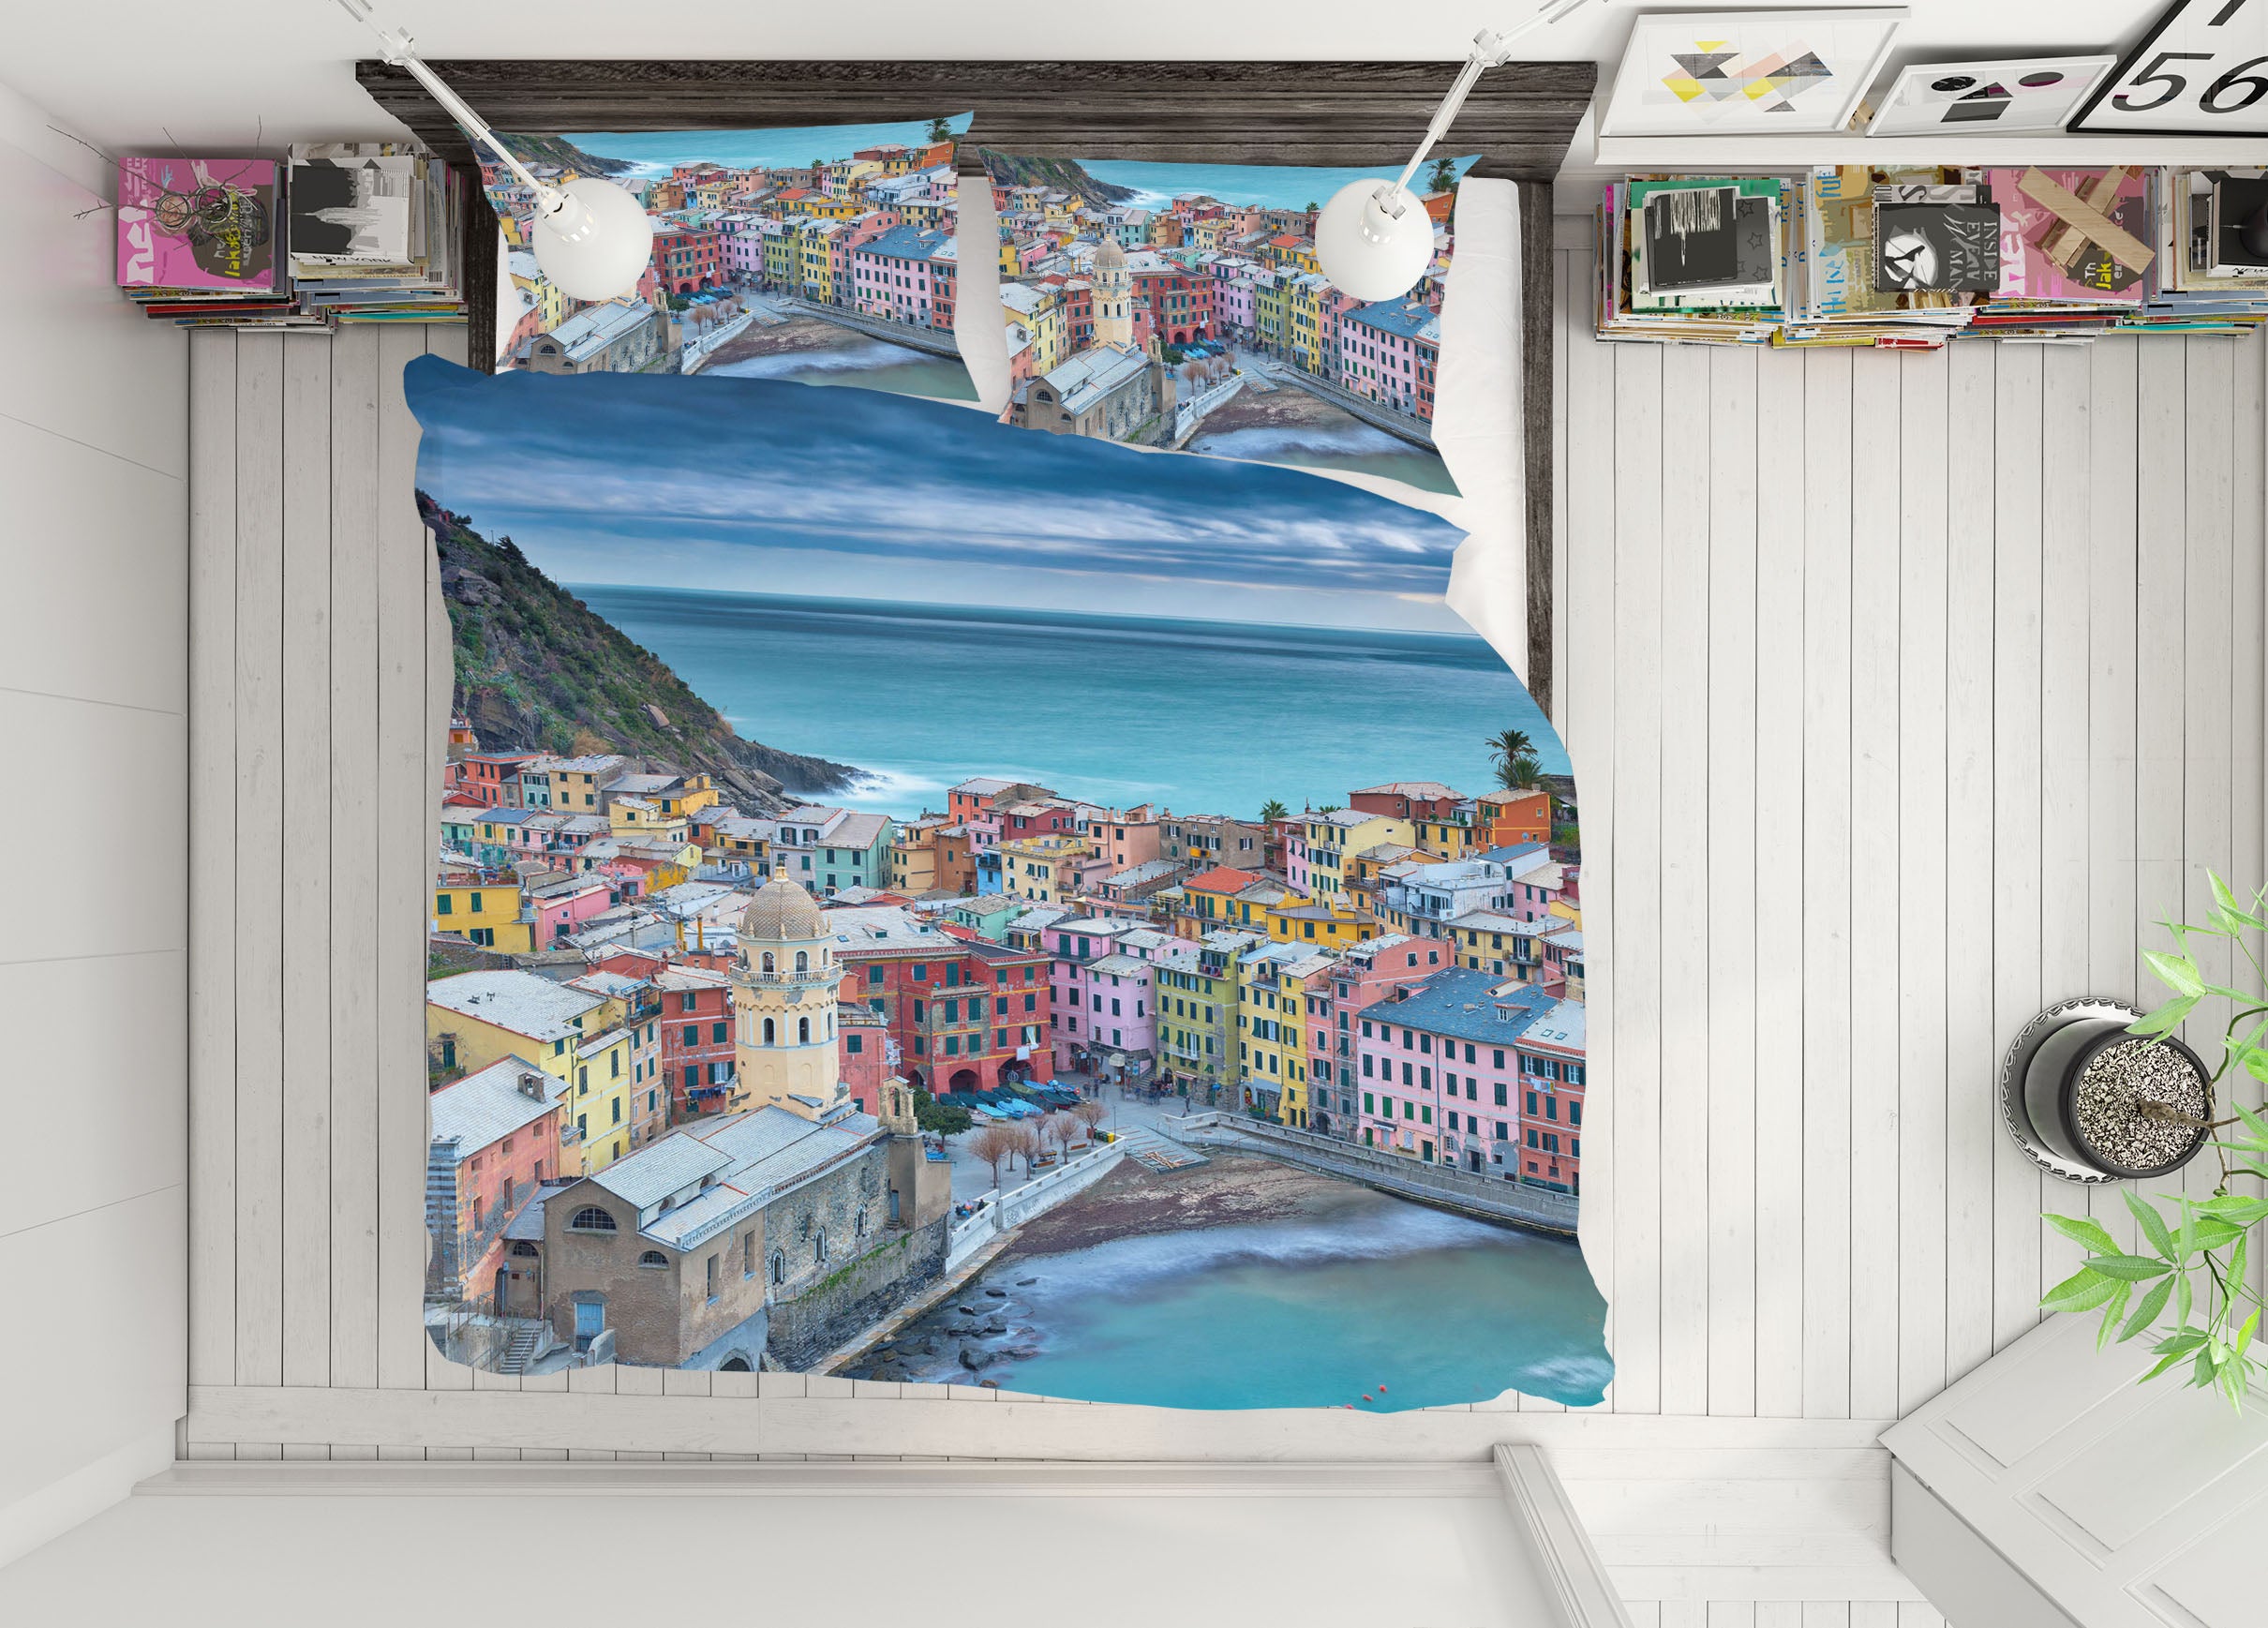 3D Seaside City 2126 Marco Carmassi Bedding Bed Pillowcases Quilt